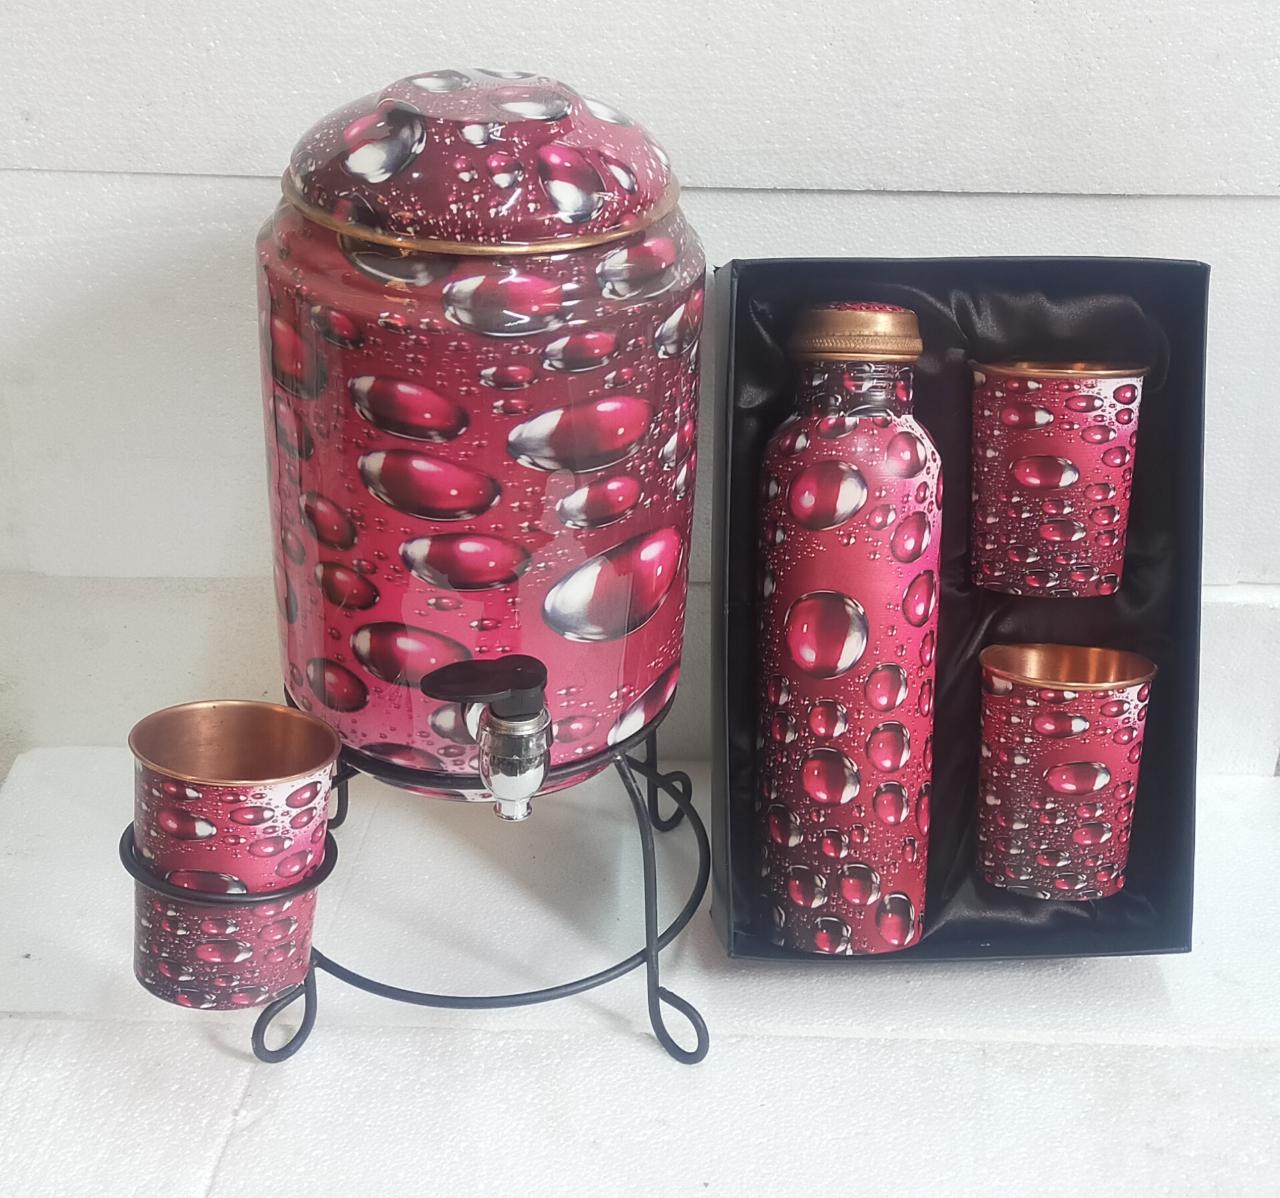 Set of 6 Handpainted Copper Water Tank Bottle and Glass Set, Red and White